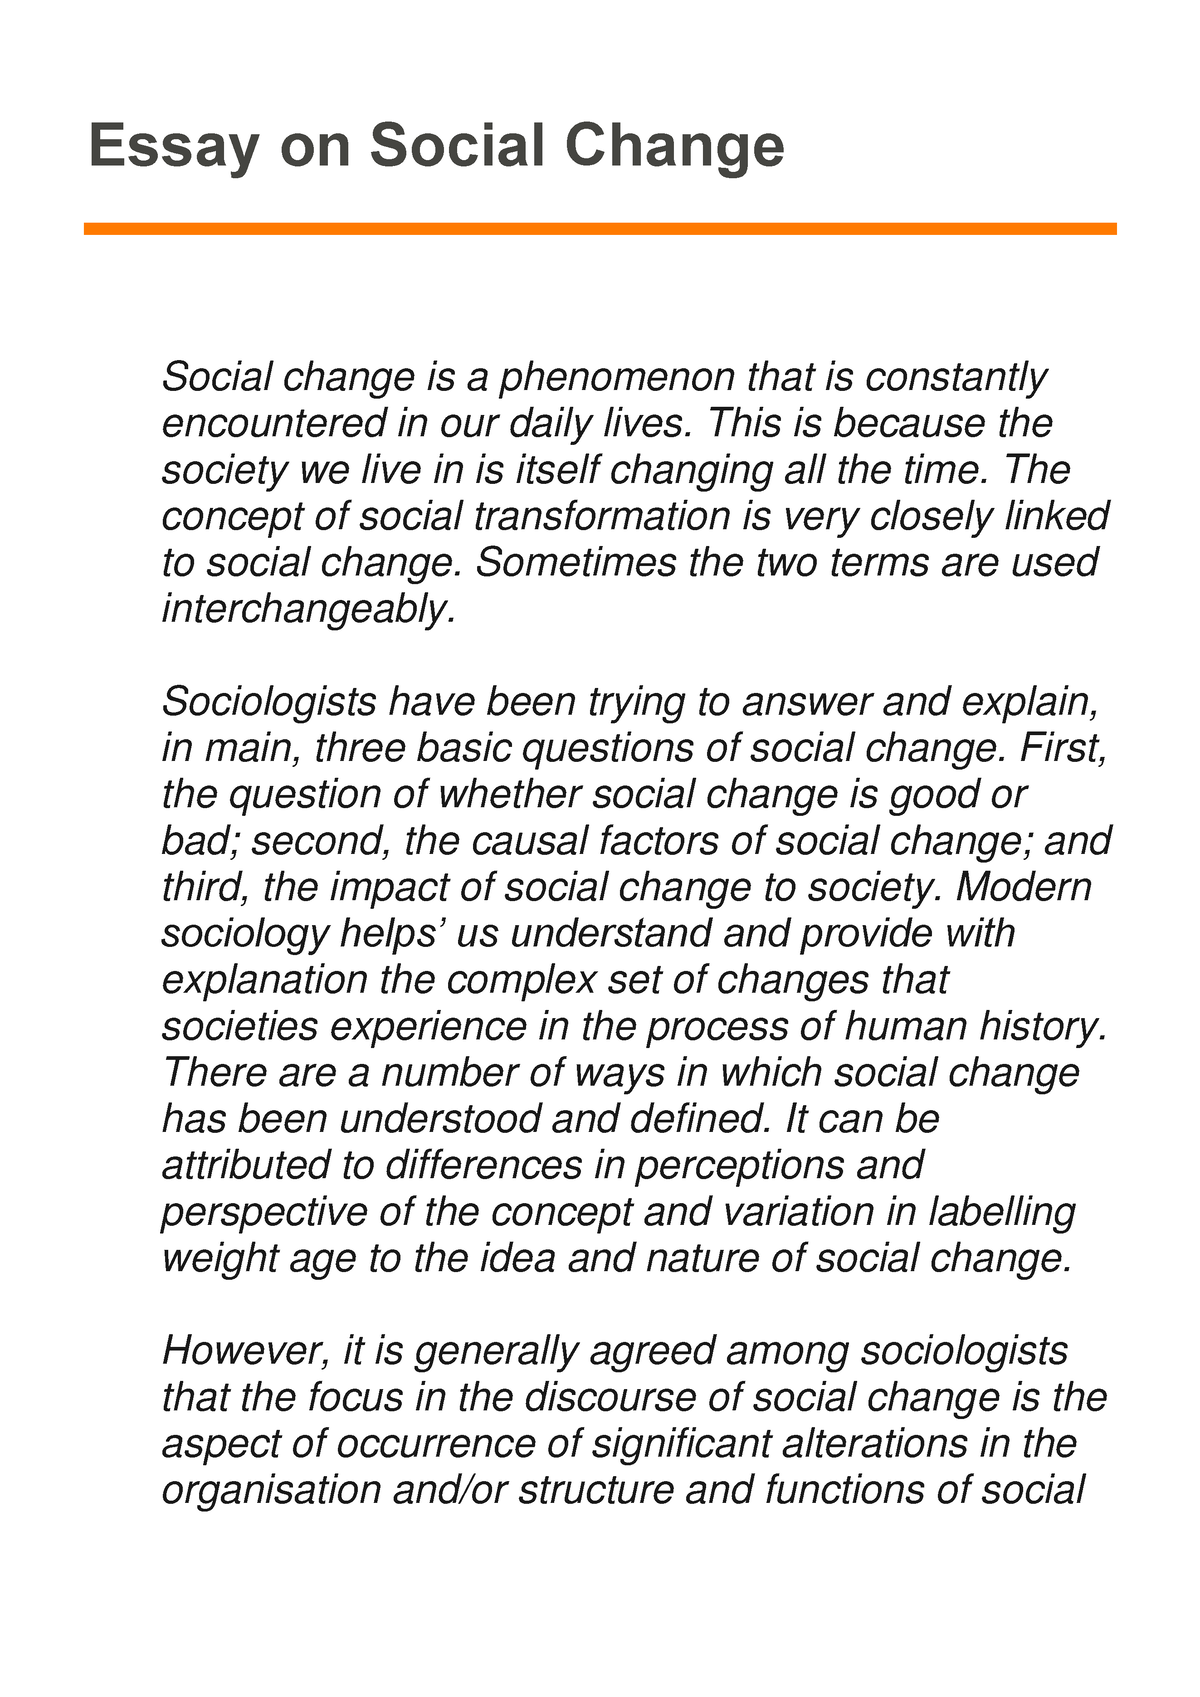 our changing society essay